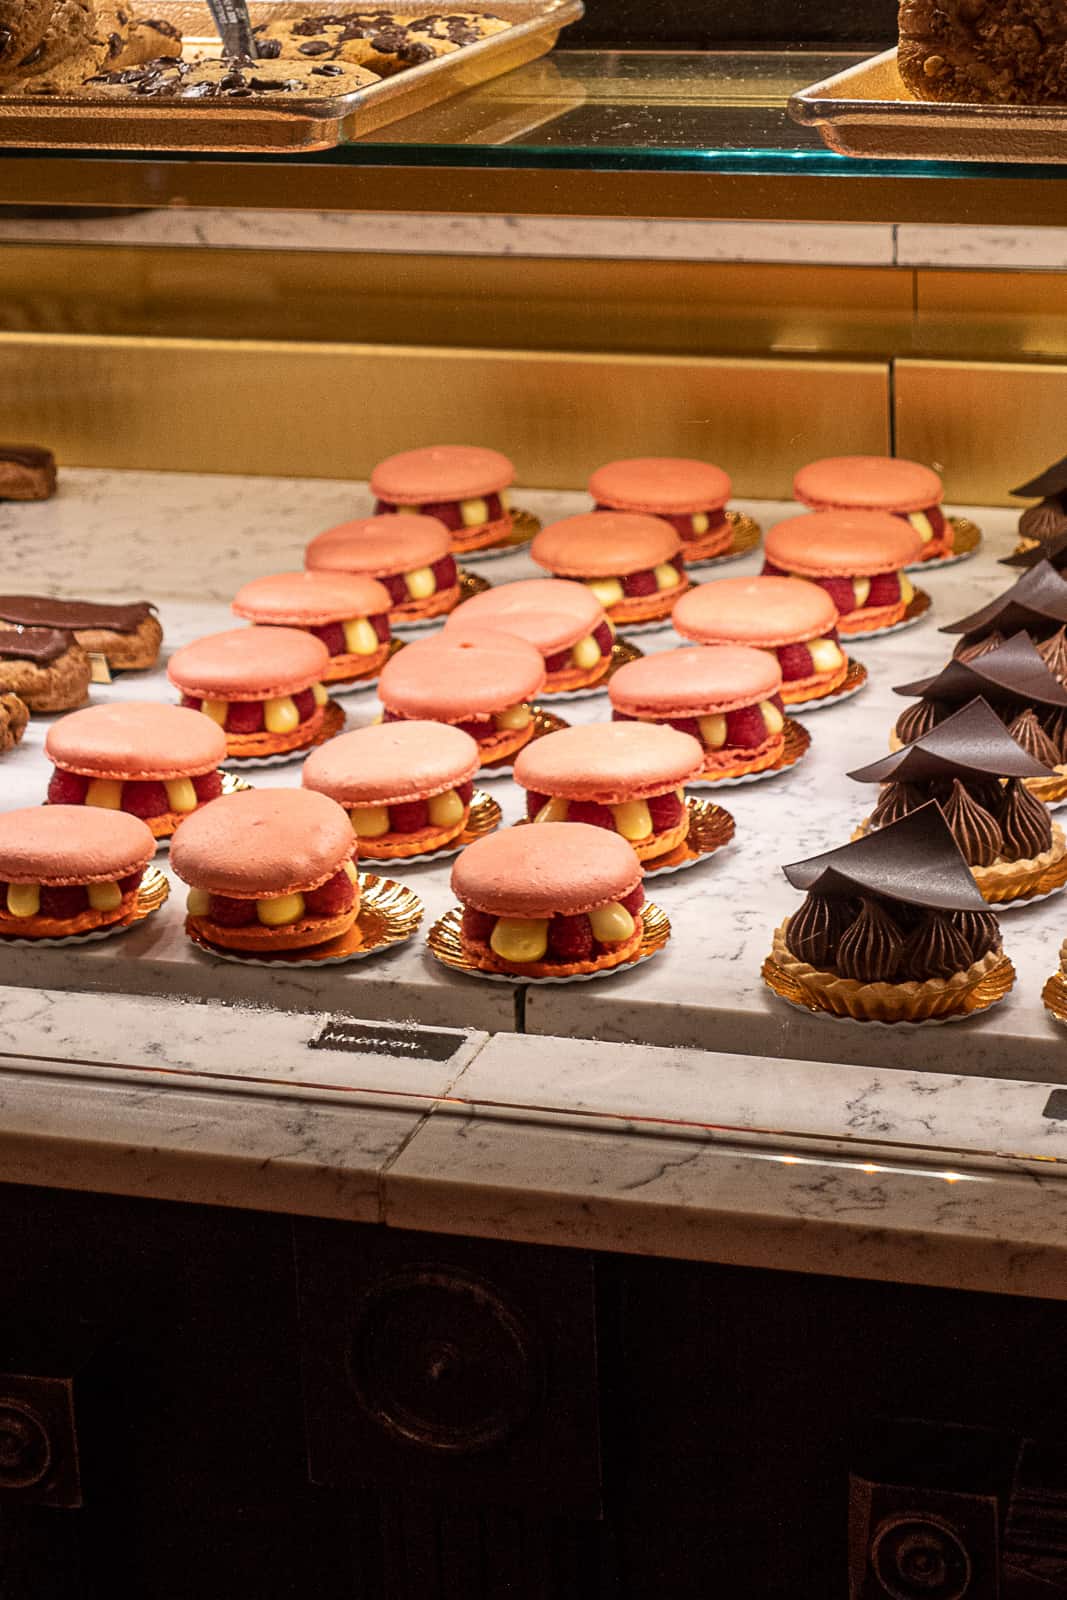 Strawberry Macaroons at Les Halles Restaurant in Epcot France Pavilion